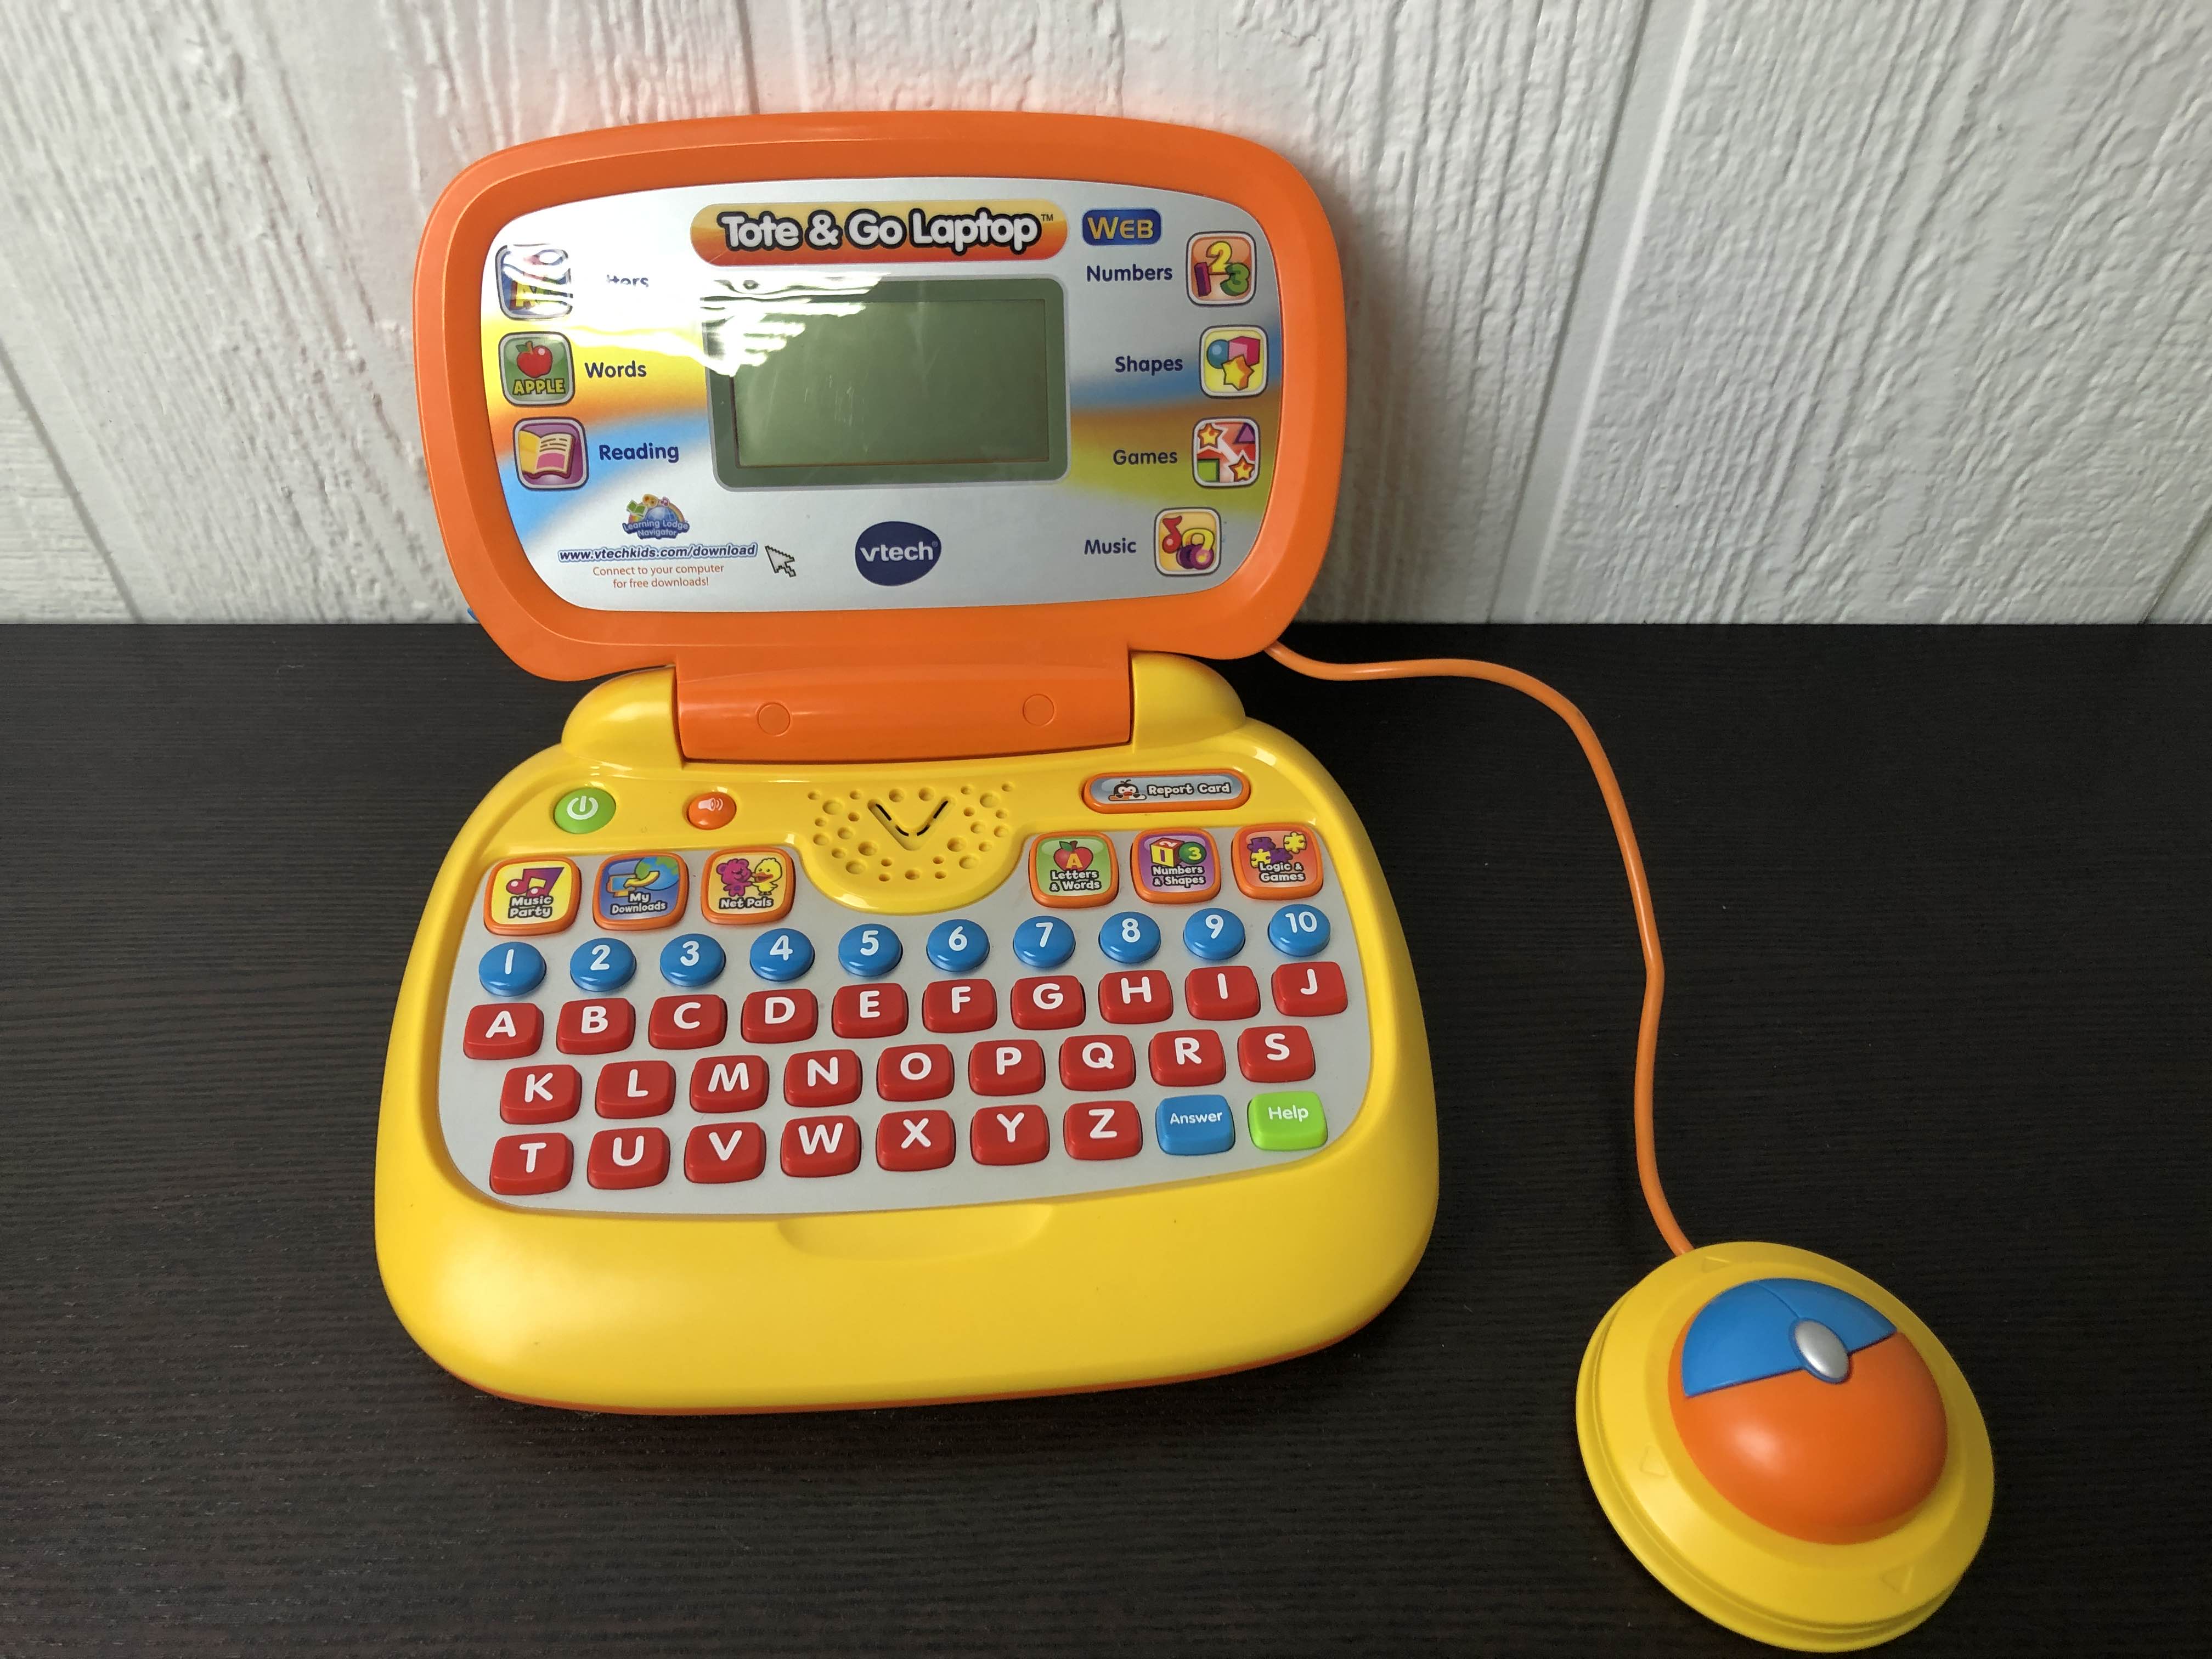 Vtech tote n go laptop @600 lp550 No batt cover, By Lenwil Babies Need